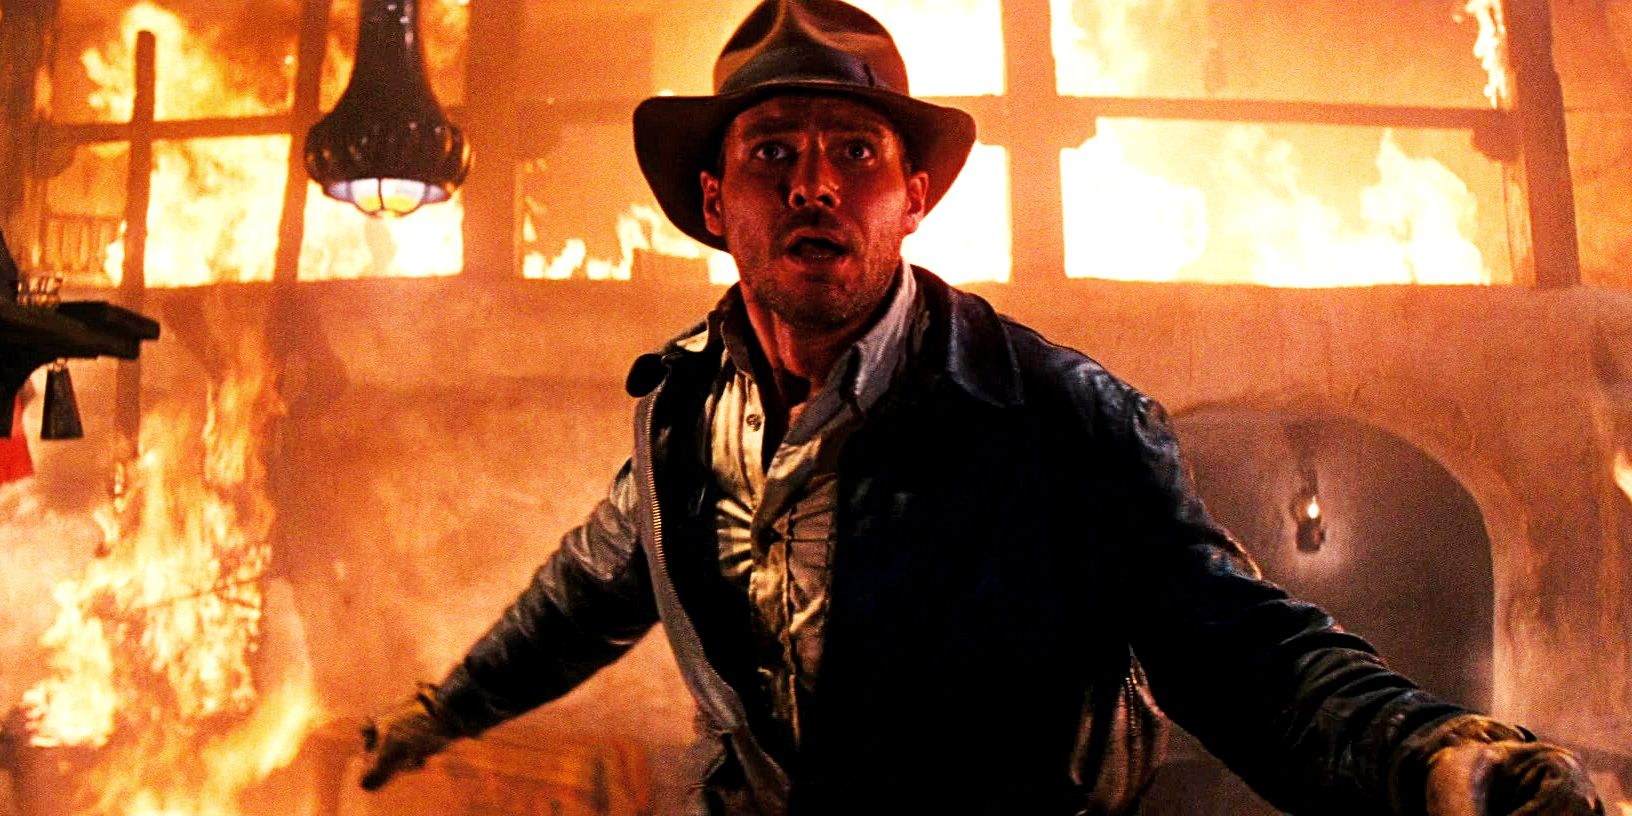 Harrison Ford as Indiana Jones standing in front of a fire in Raiders of the Lost Ark